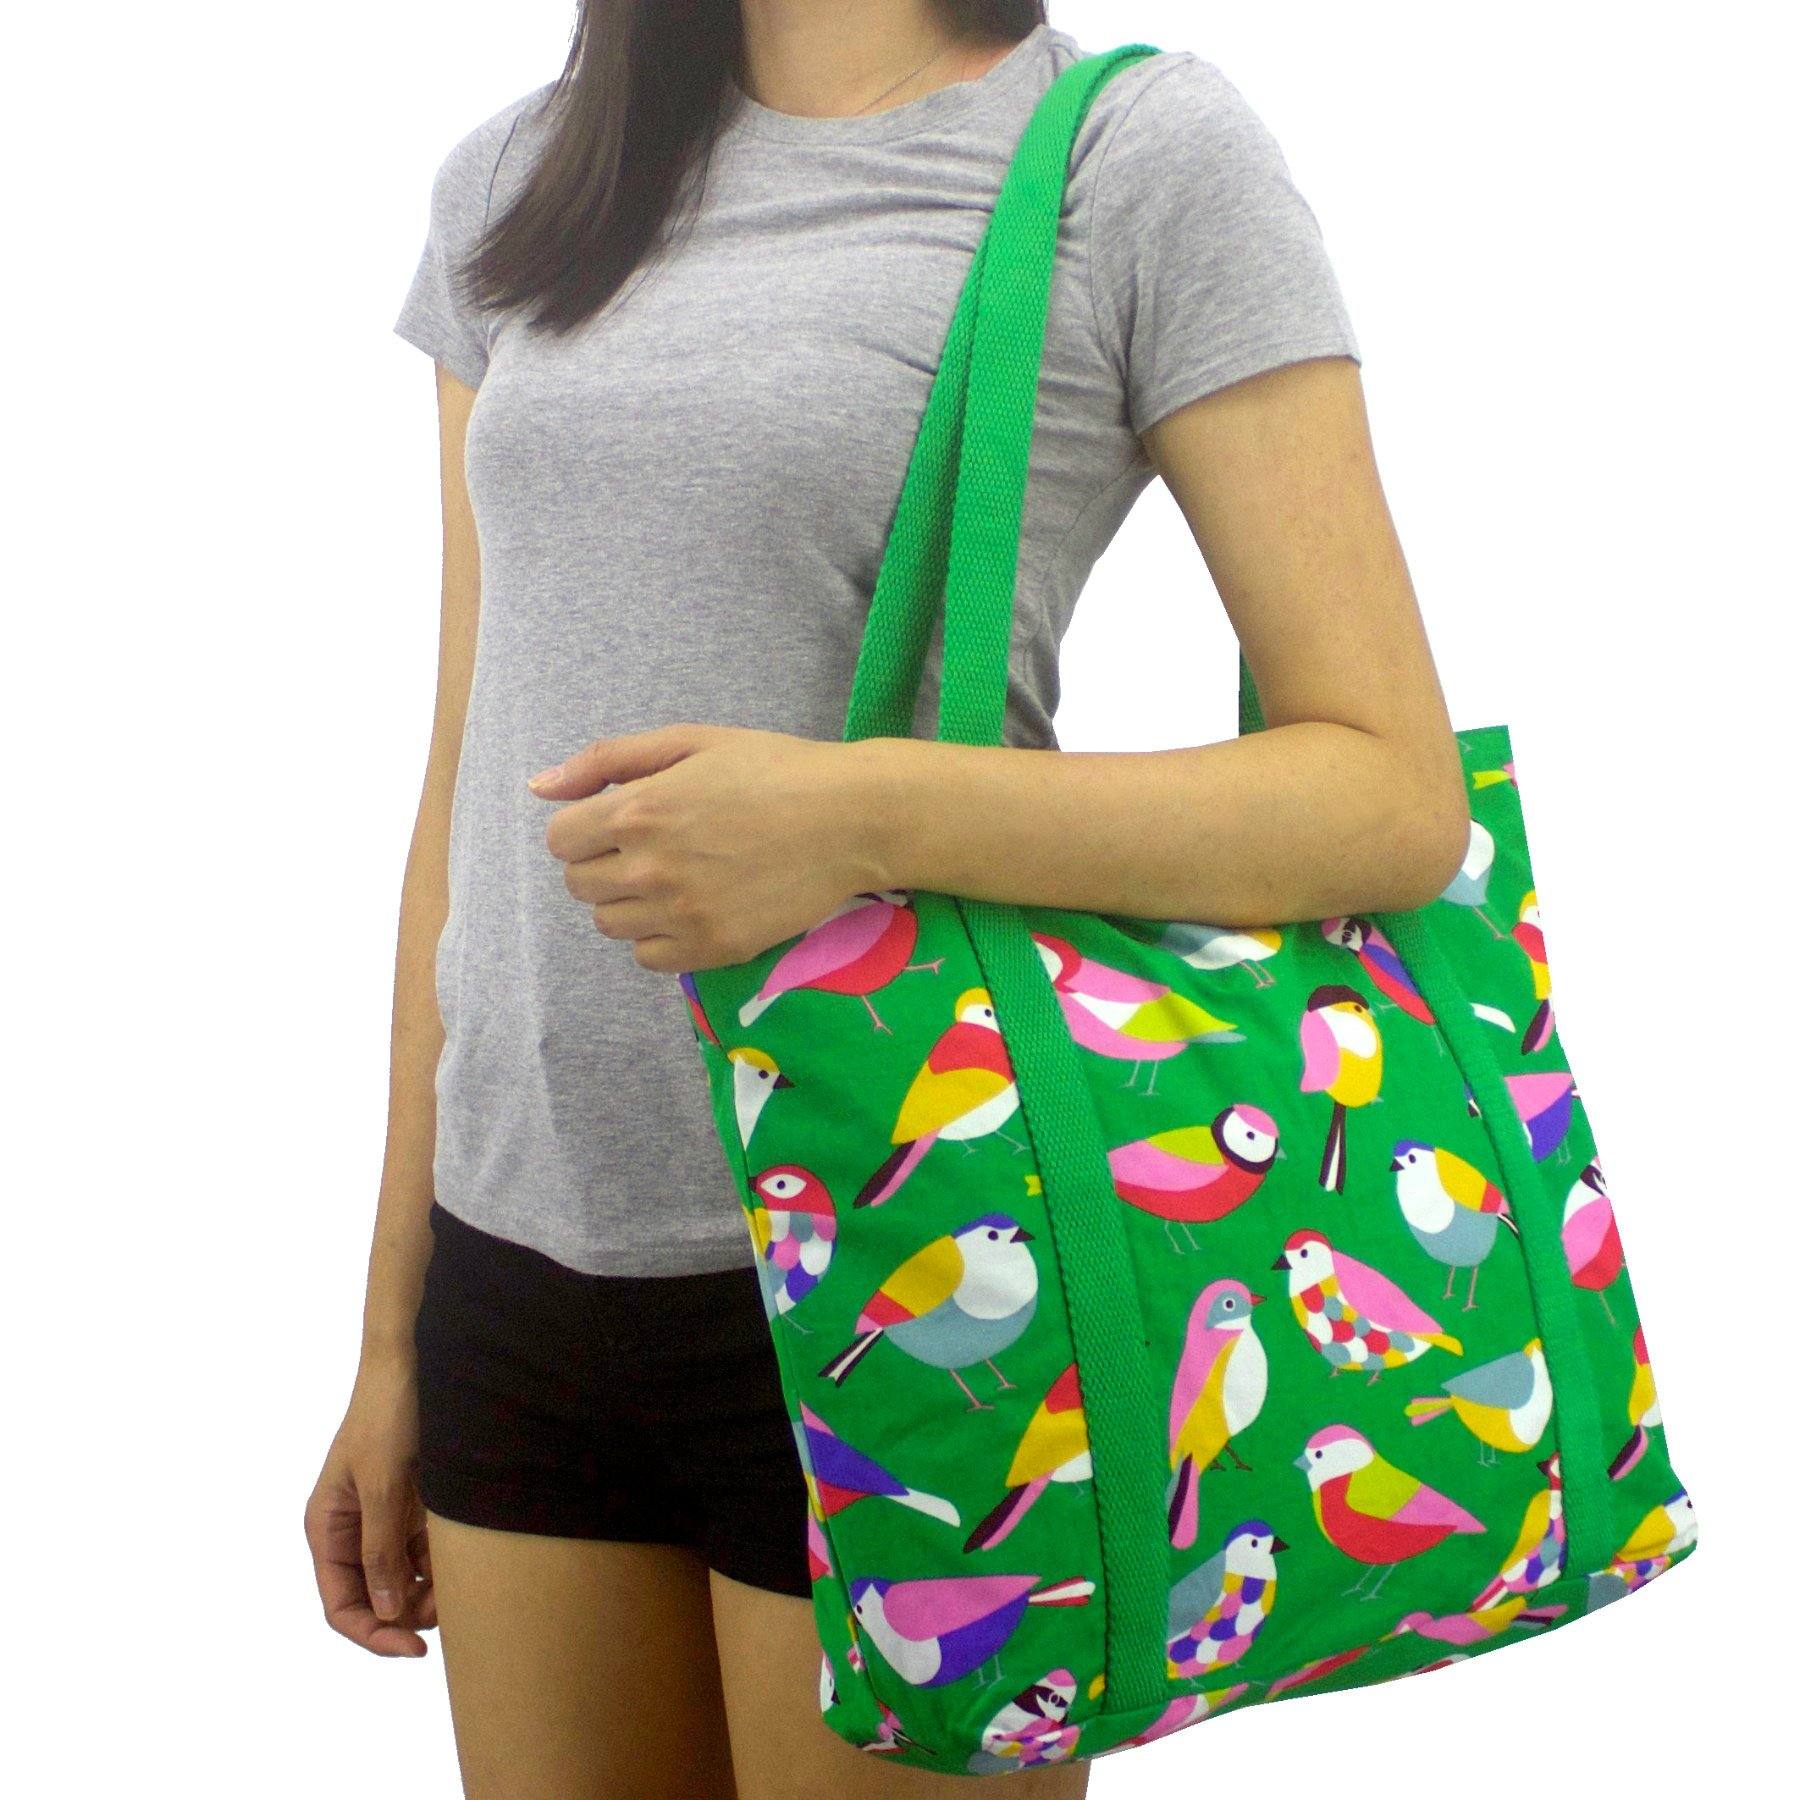 Bright Green Bird All Over Print Large Market Shopper Tote Bag for Women